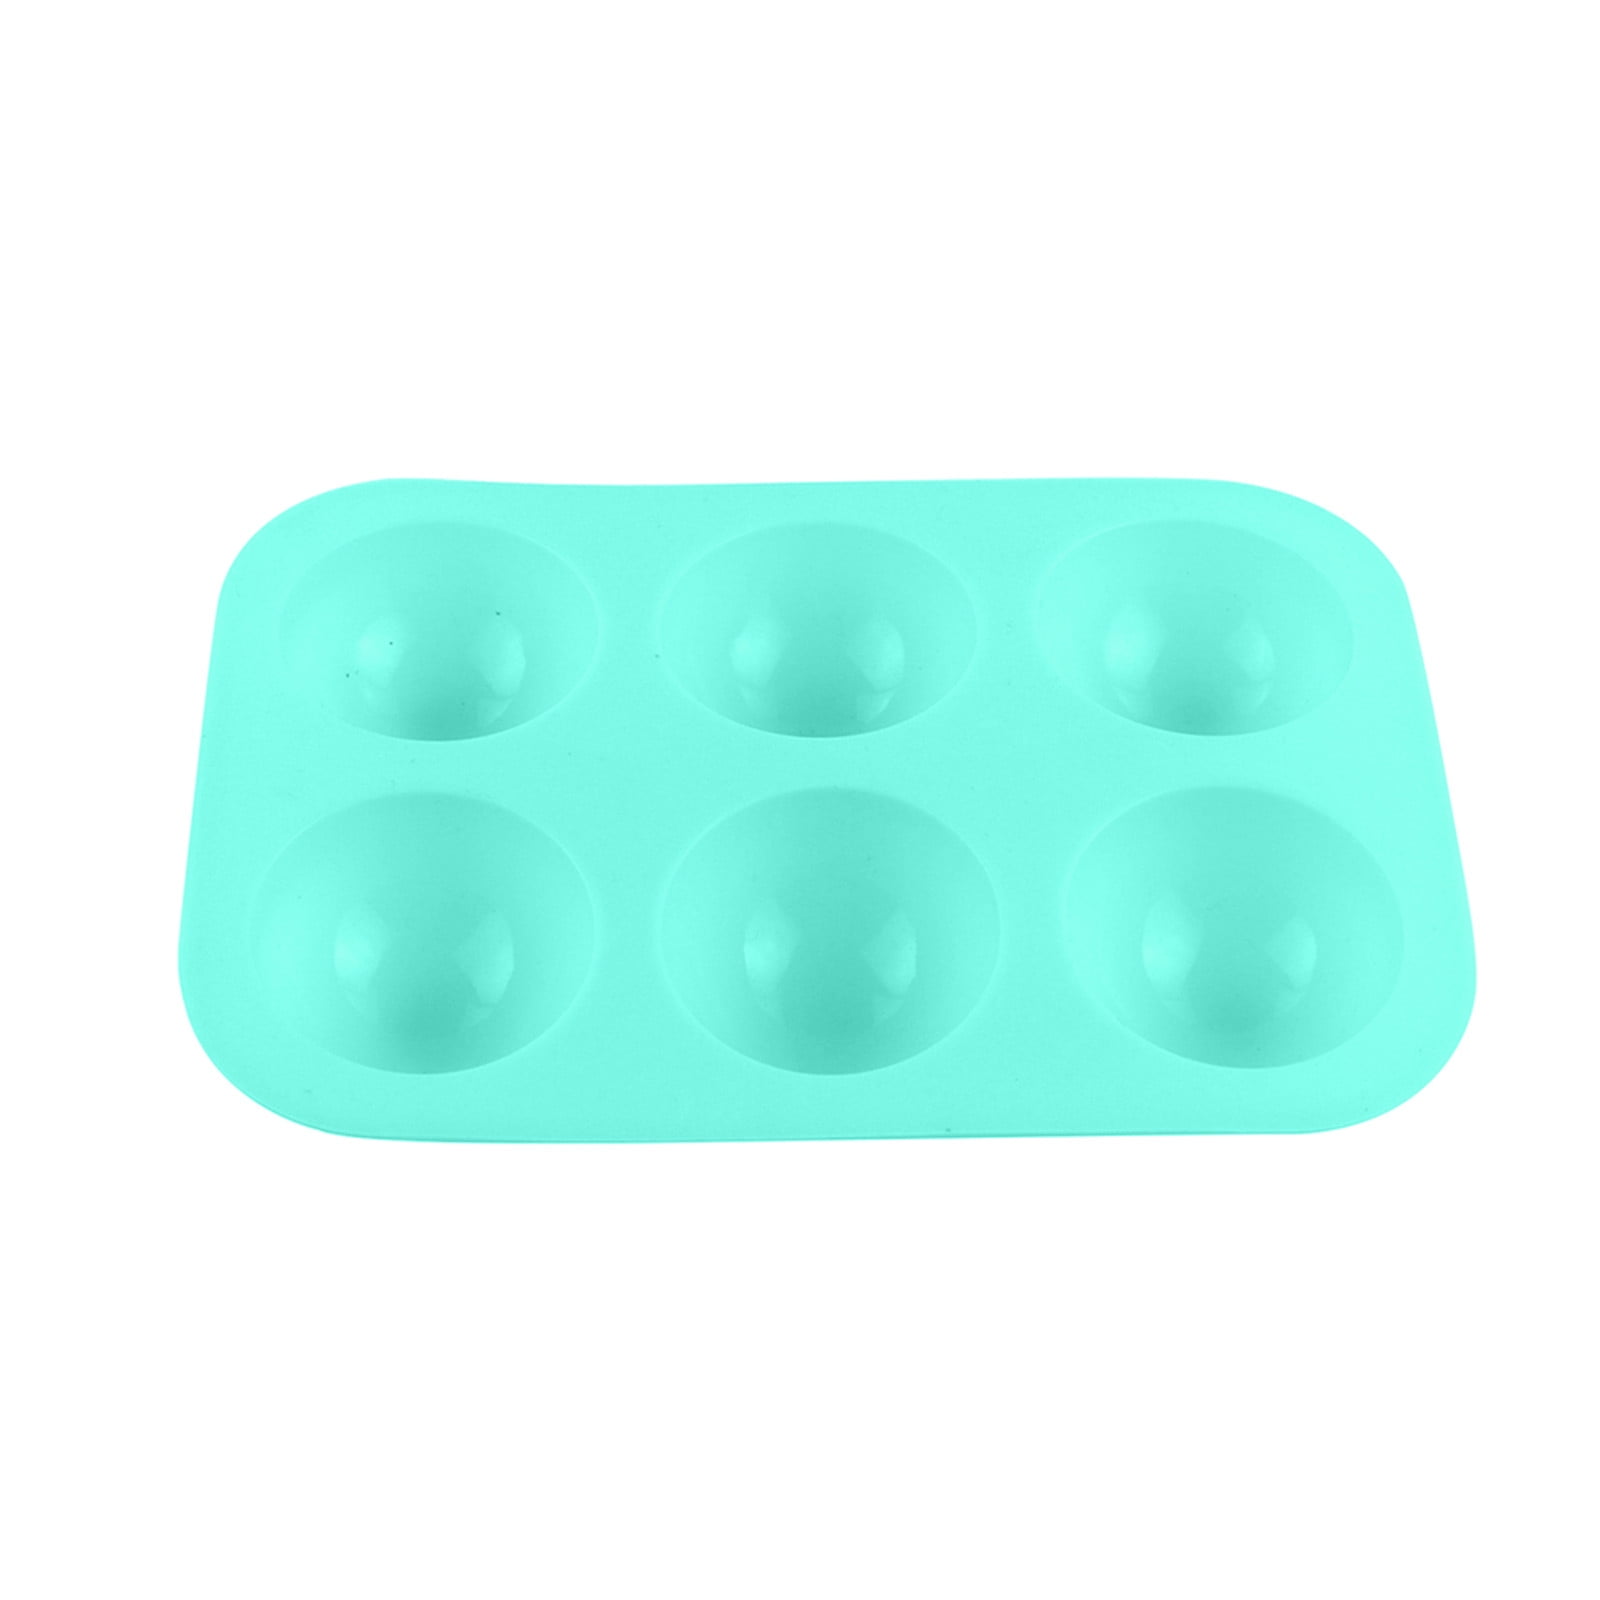 Donald Ball Sphere Silicone Cake Mold Muffin Chocolate Cookie Baking Mould Pan - Walmart.com